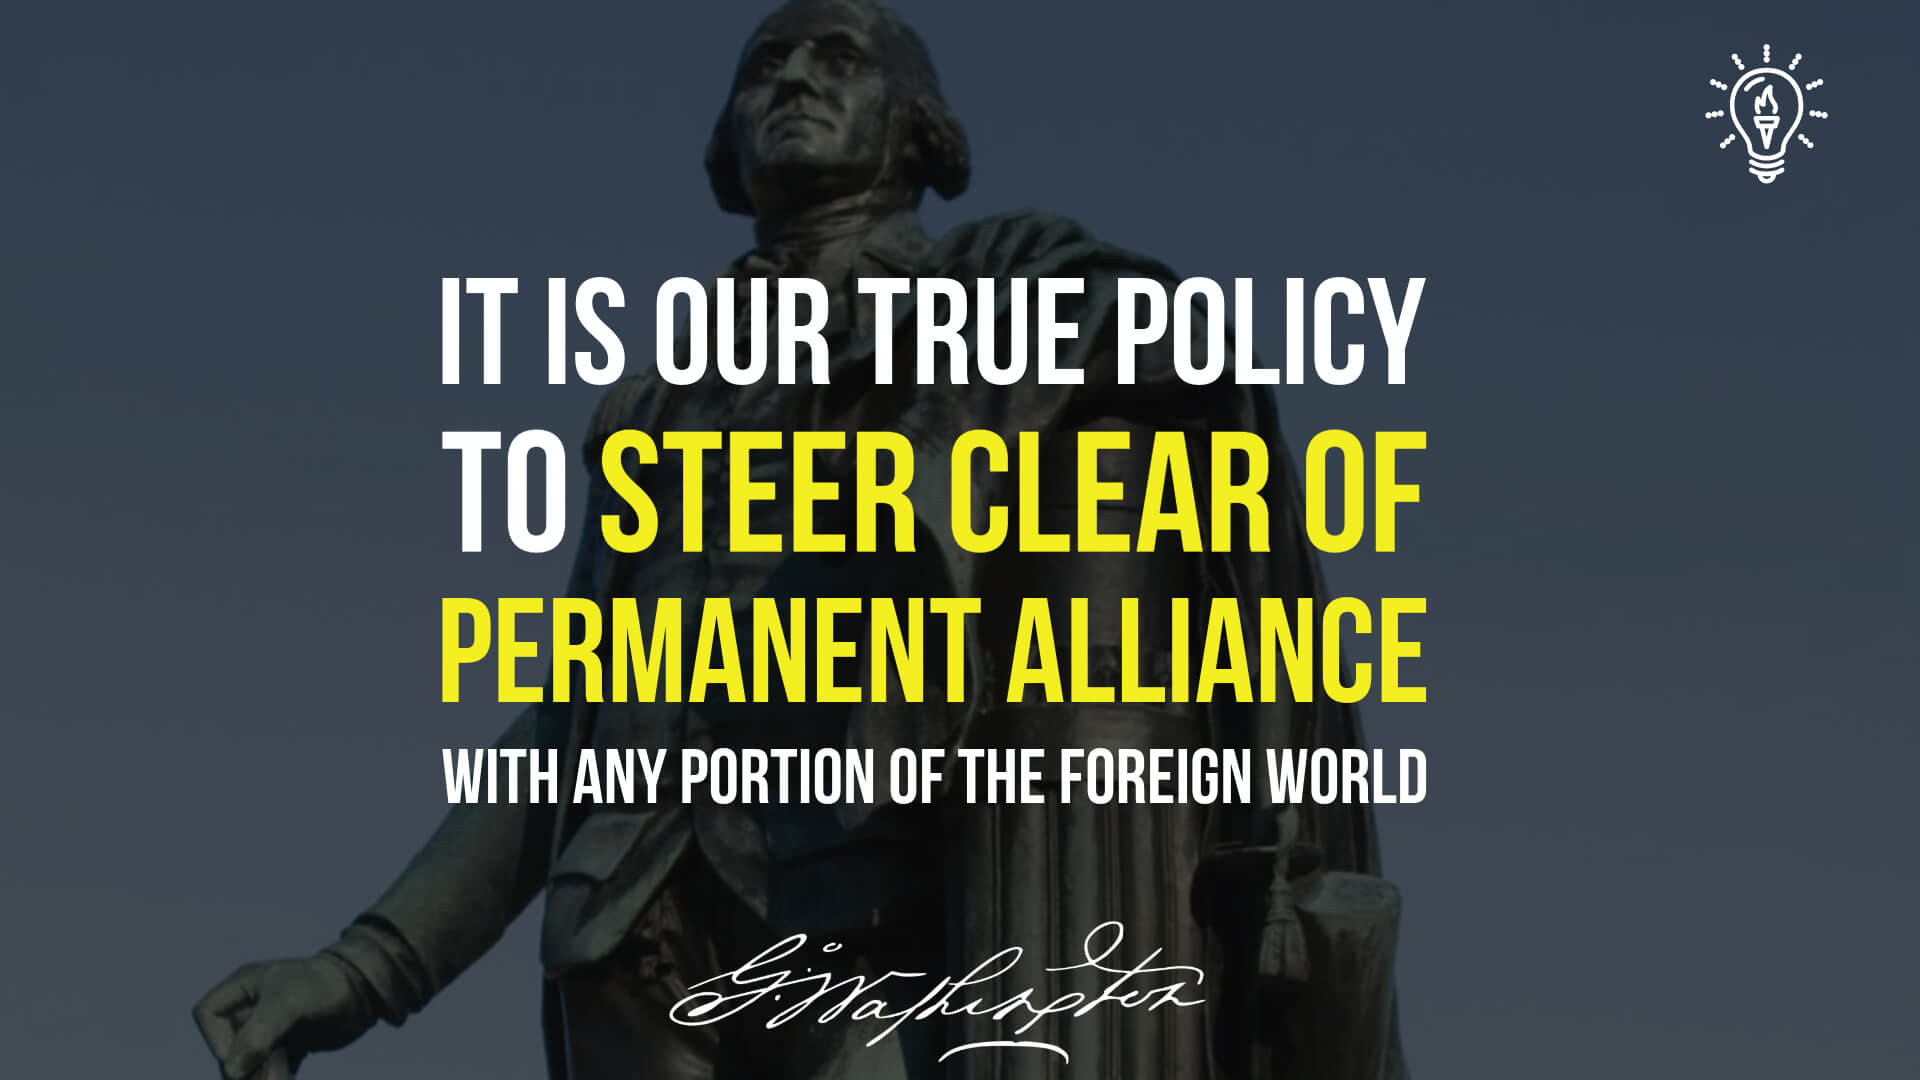 No Permanent Alliances: Foreign Policy of Washington and Jefferson